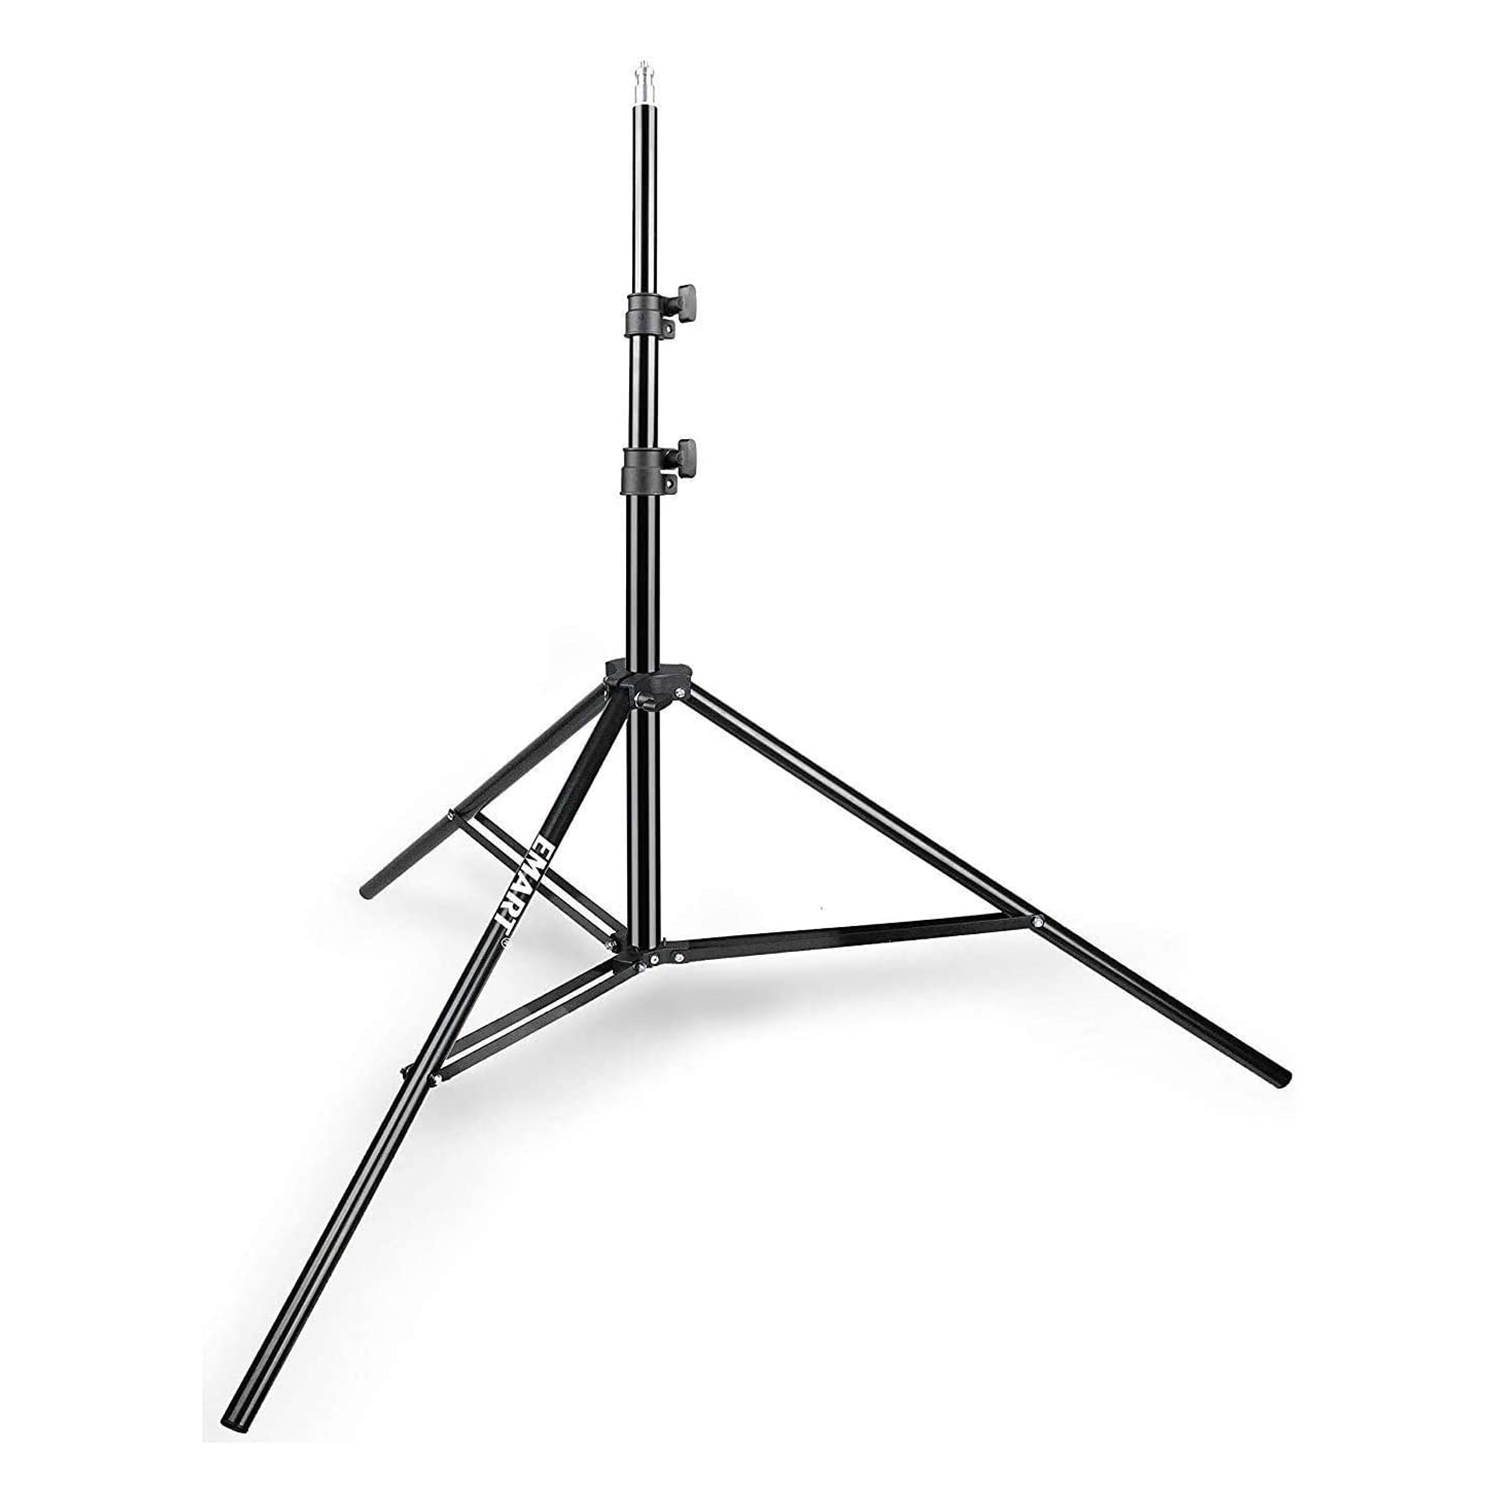 EMART 6.2ft/8.5ft Photography Light Stands for Photo Video Studio and Product Portrait Shooting